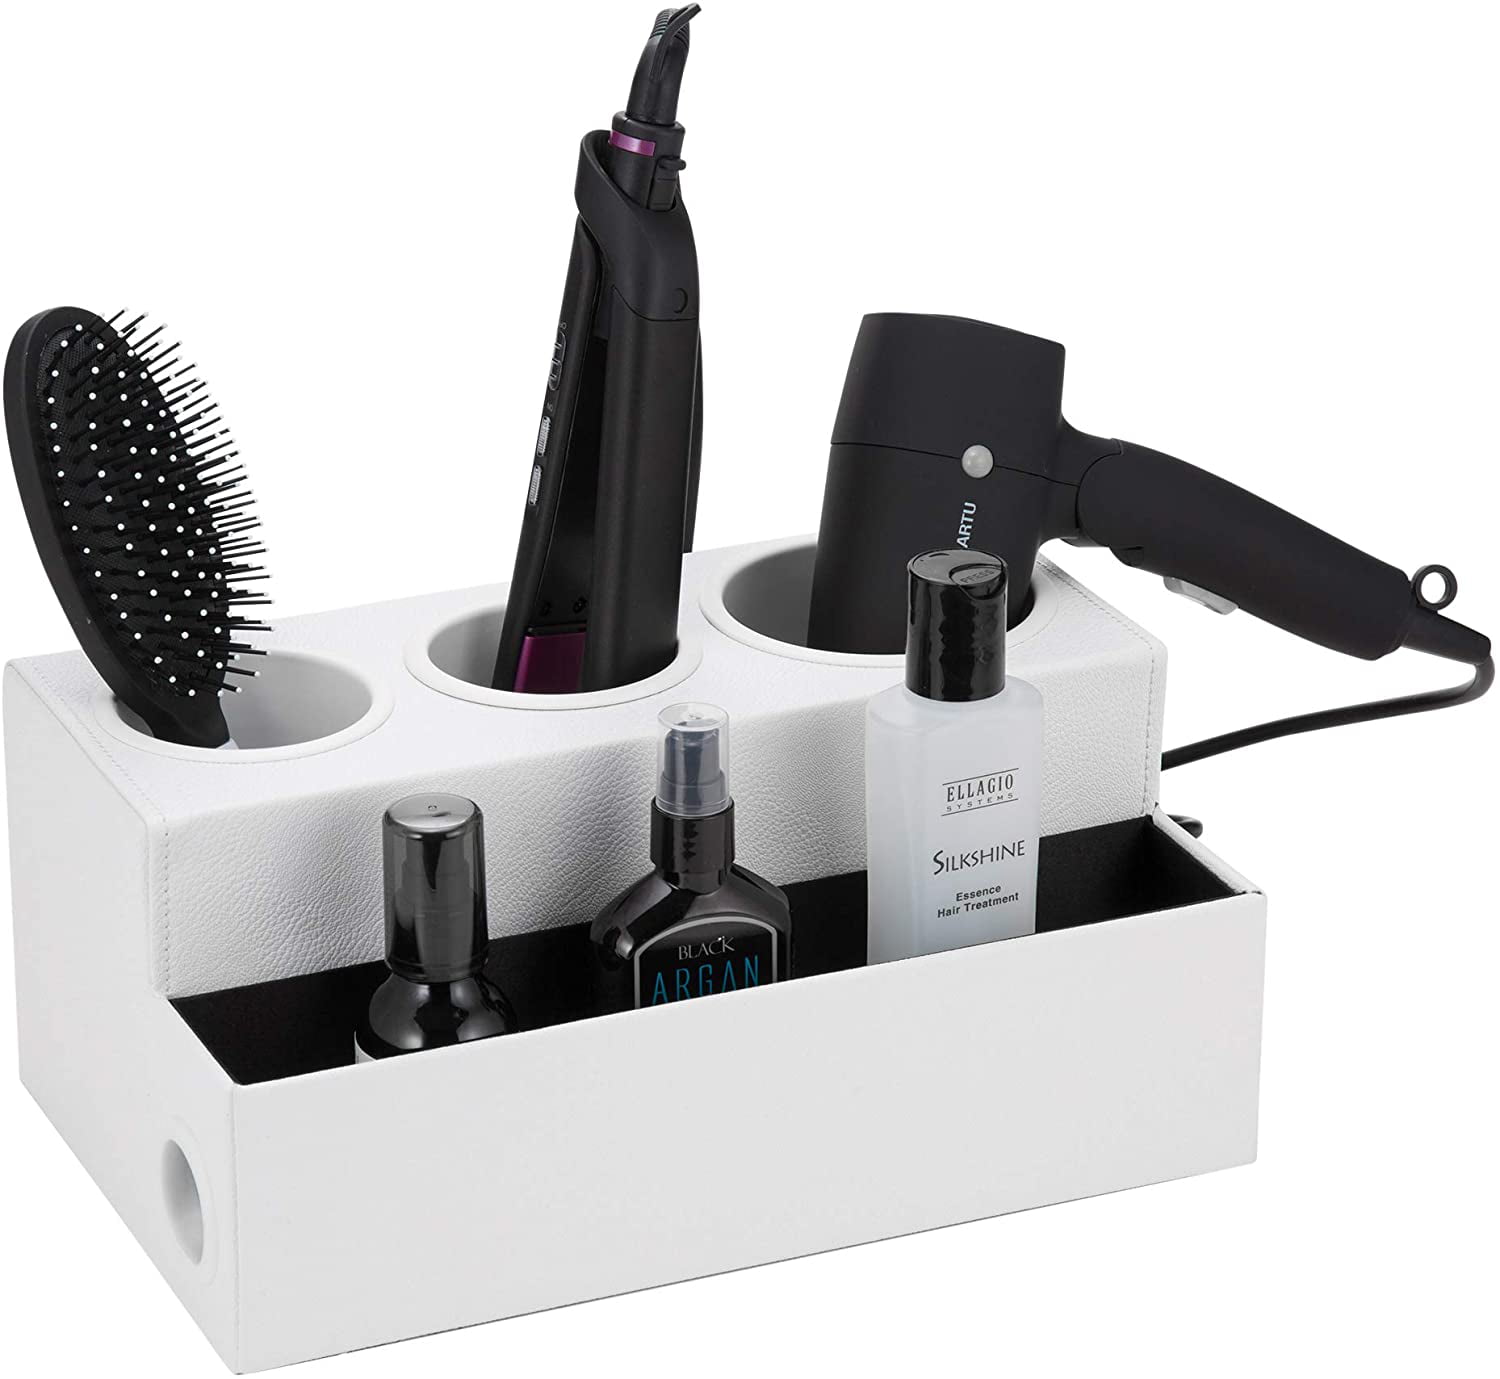 Stock Your Home Hair Care Organizer Bathroom Vanity Countertop Organizer for Curling Iron Hair Styling Station Blow Dryer Holder Hair Tools and Beauty Accessories Small Black Flat Iron